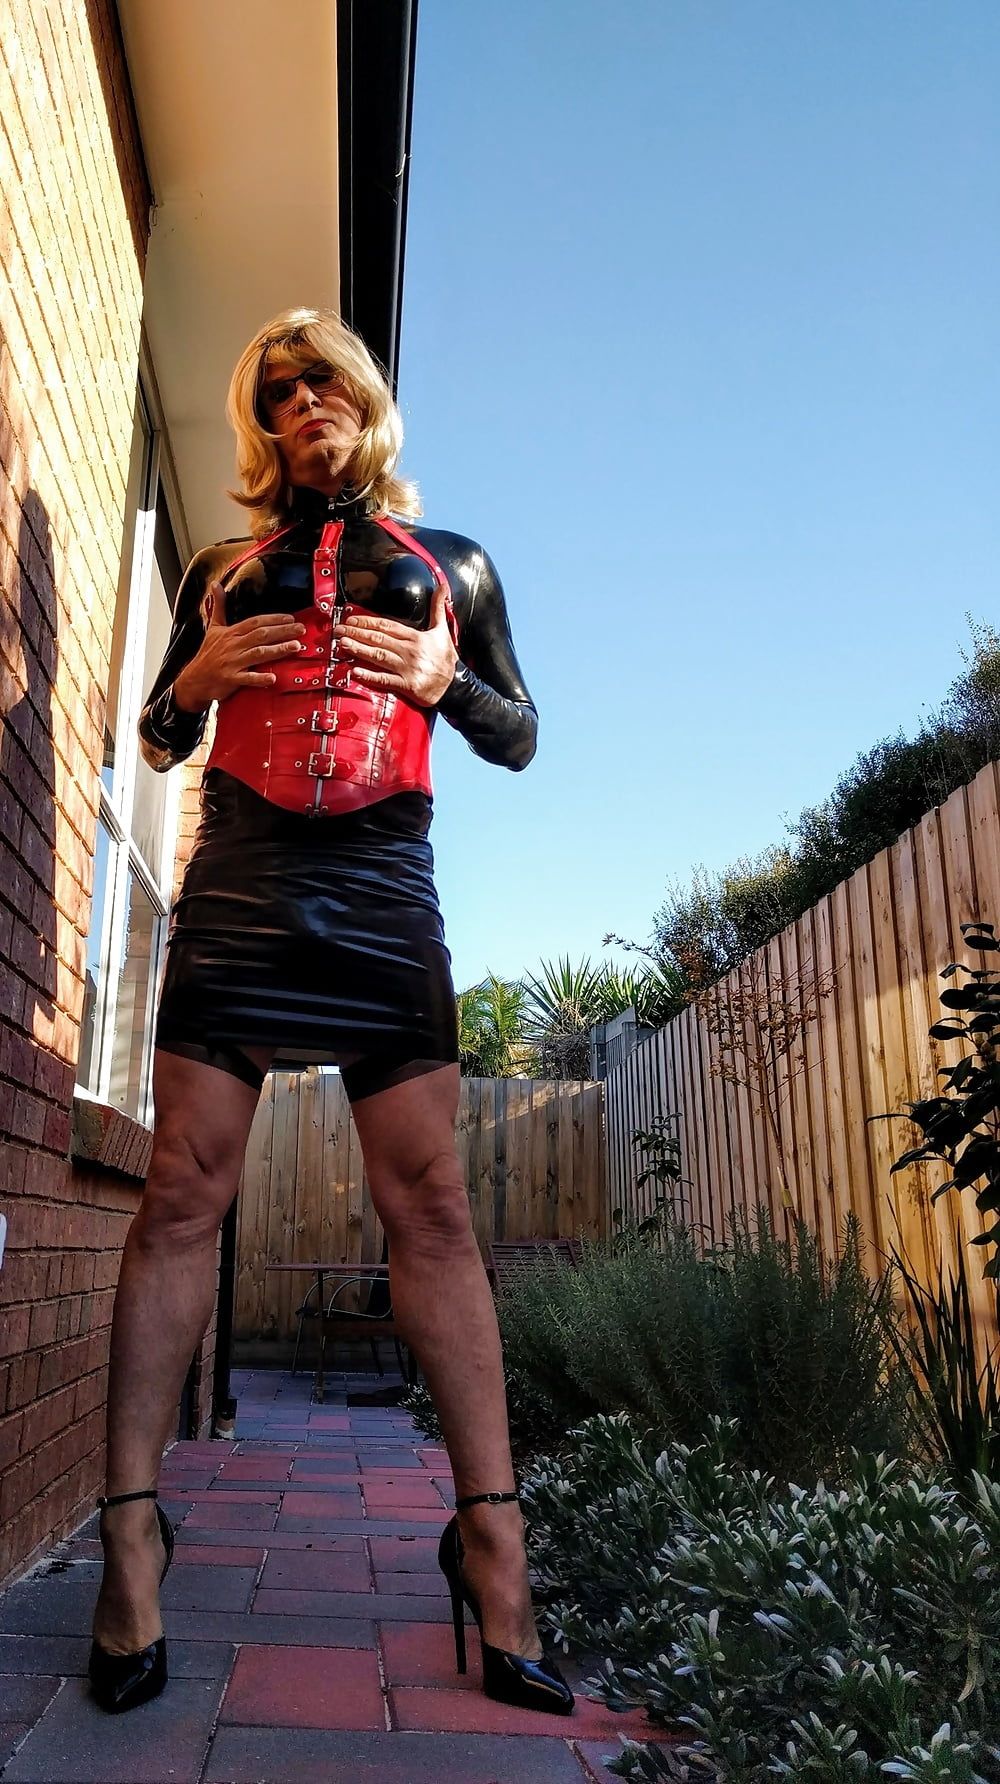 New latex skirt on a sunny Melbourne day #10